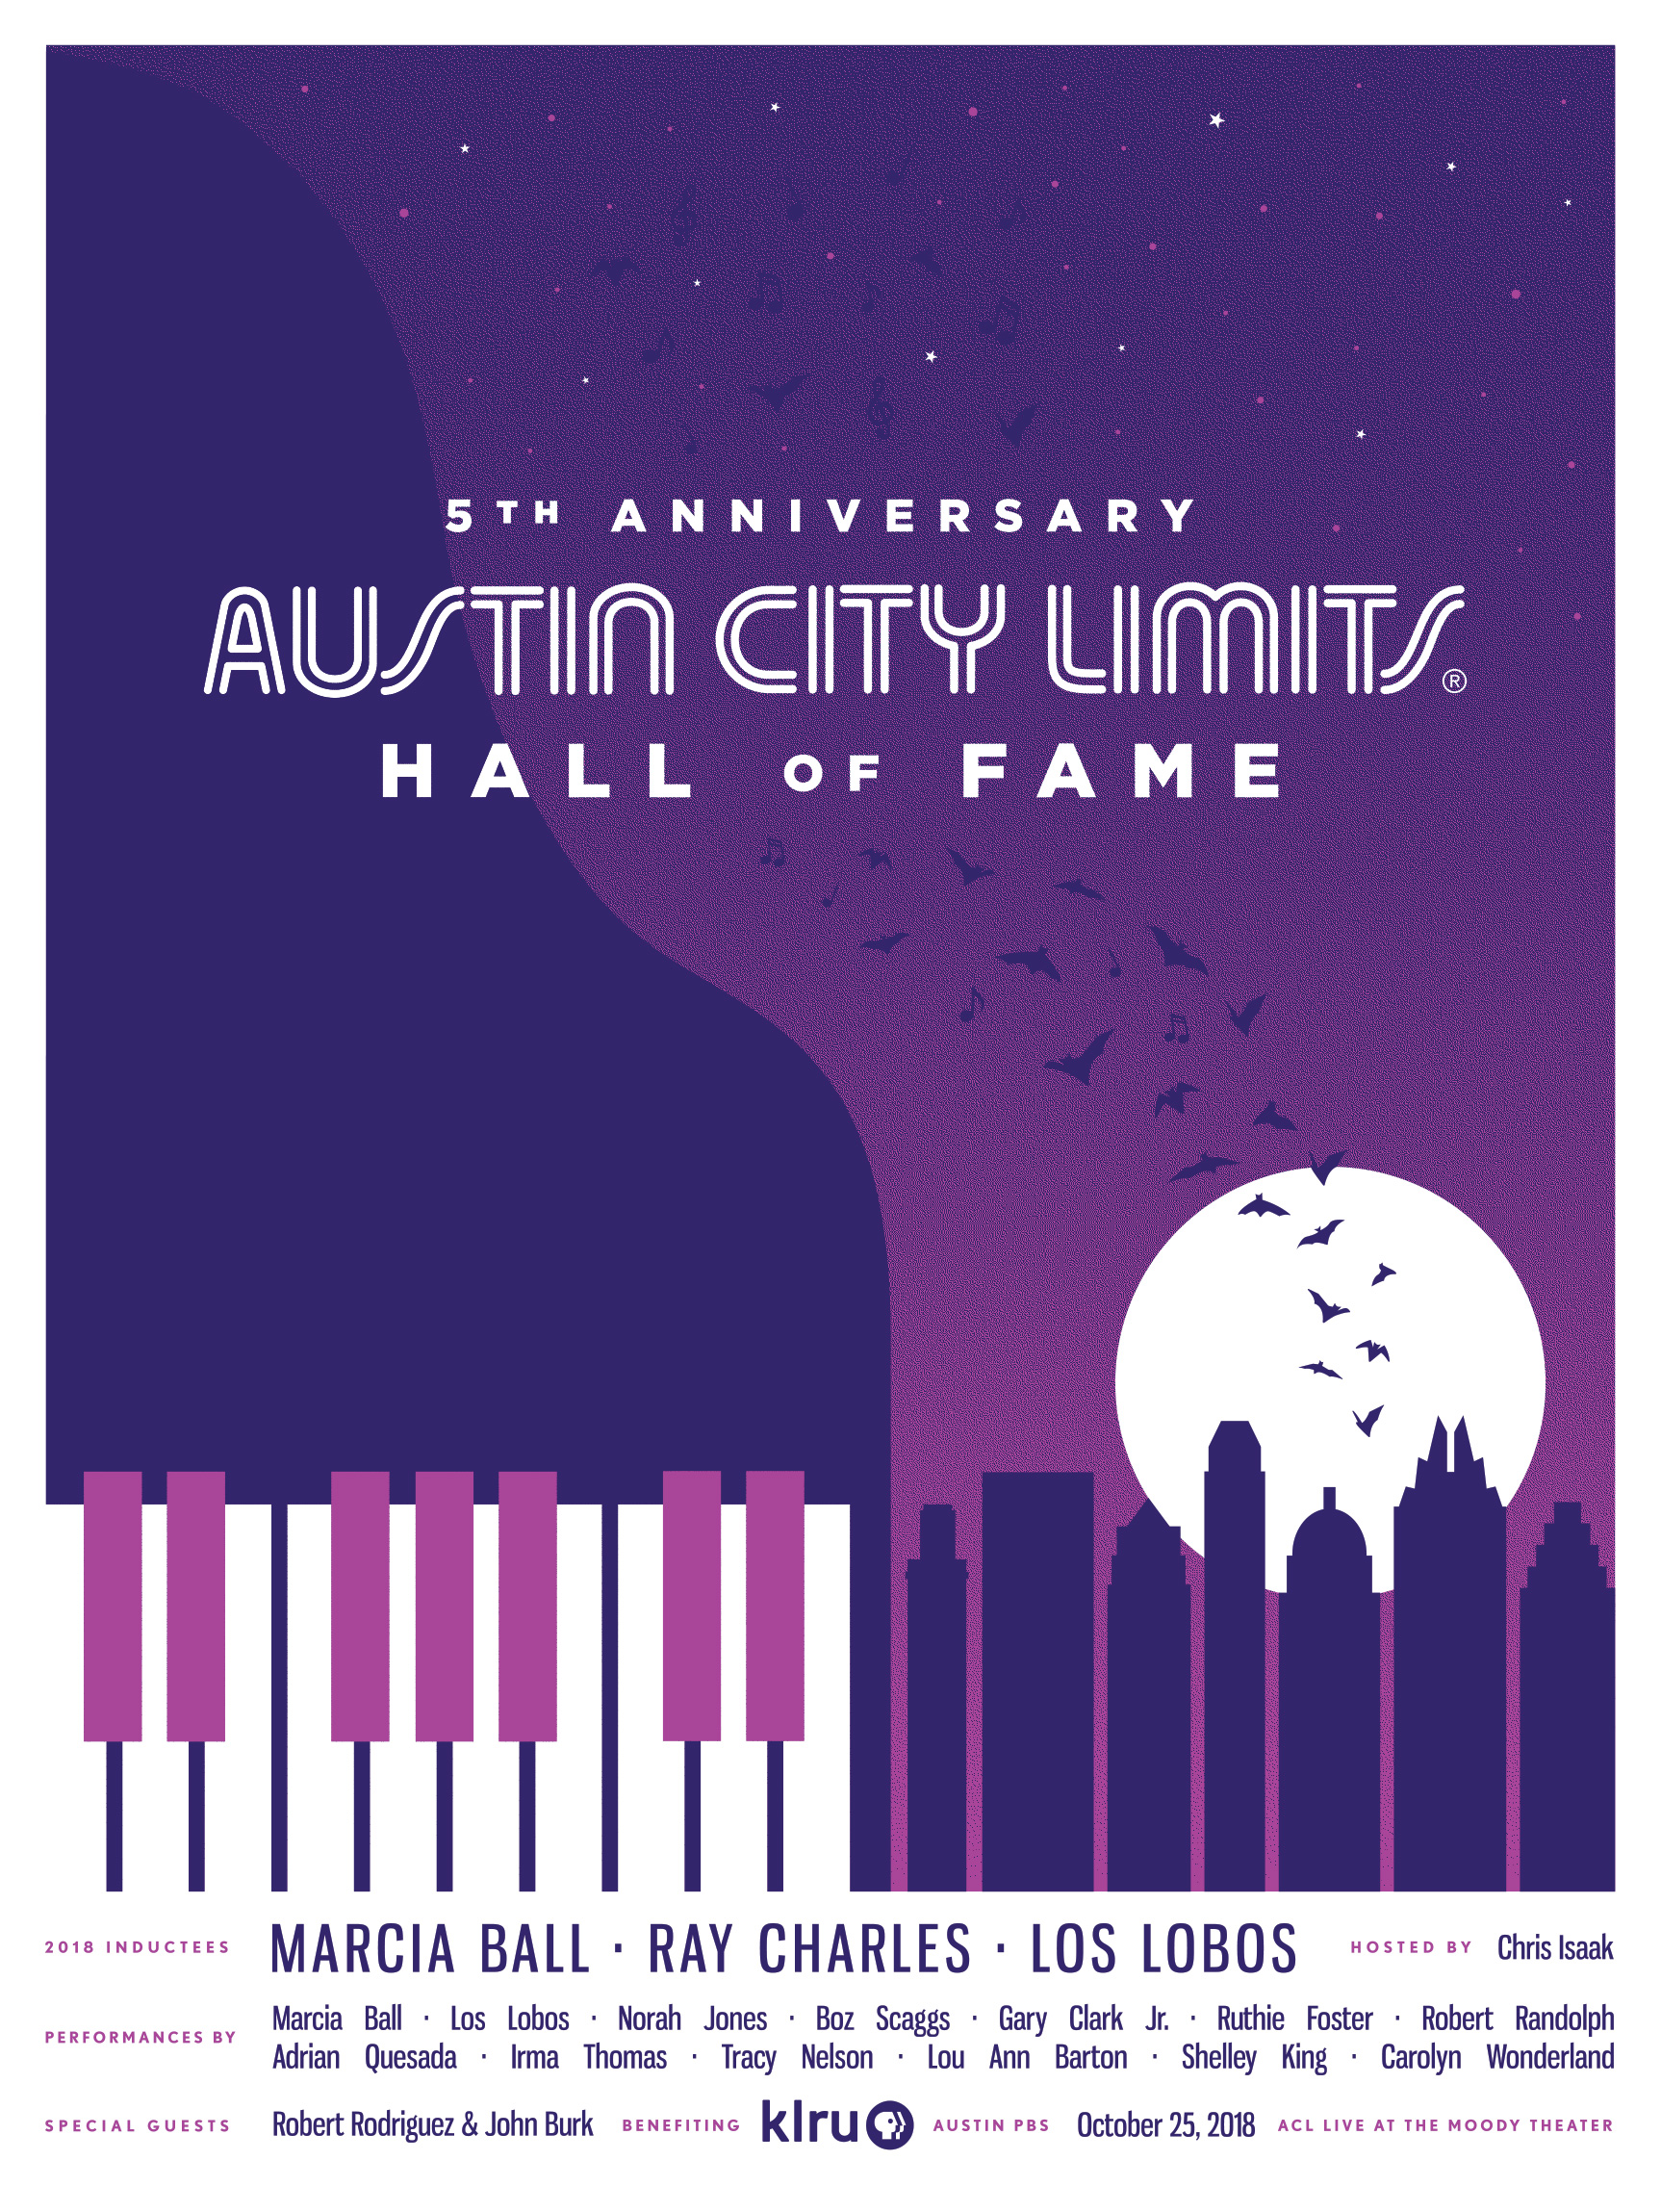 2018 Austin City Limits Hall of Fame Poster